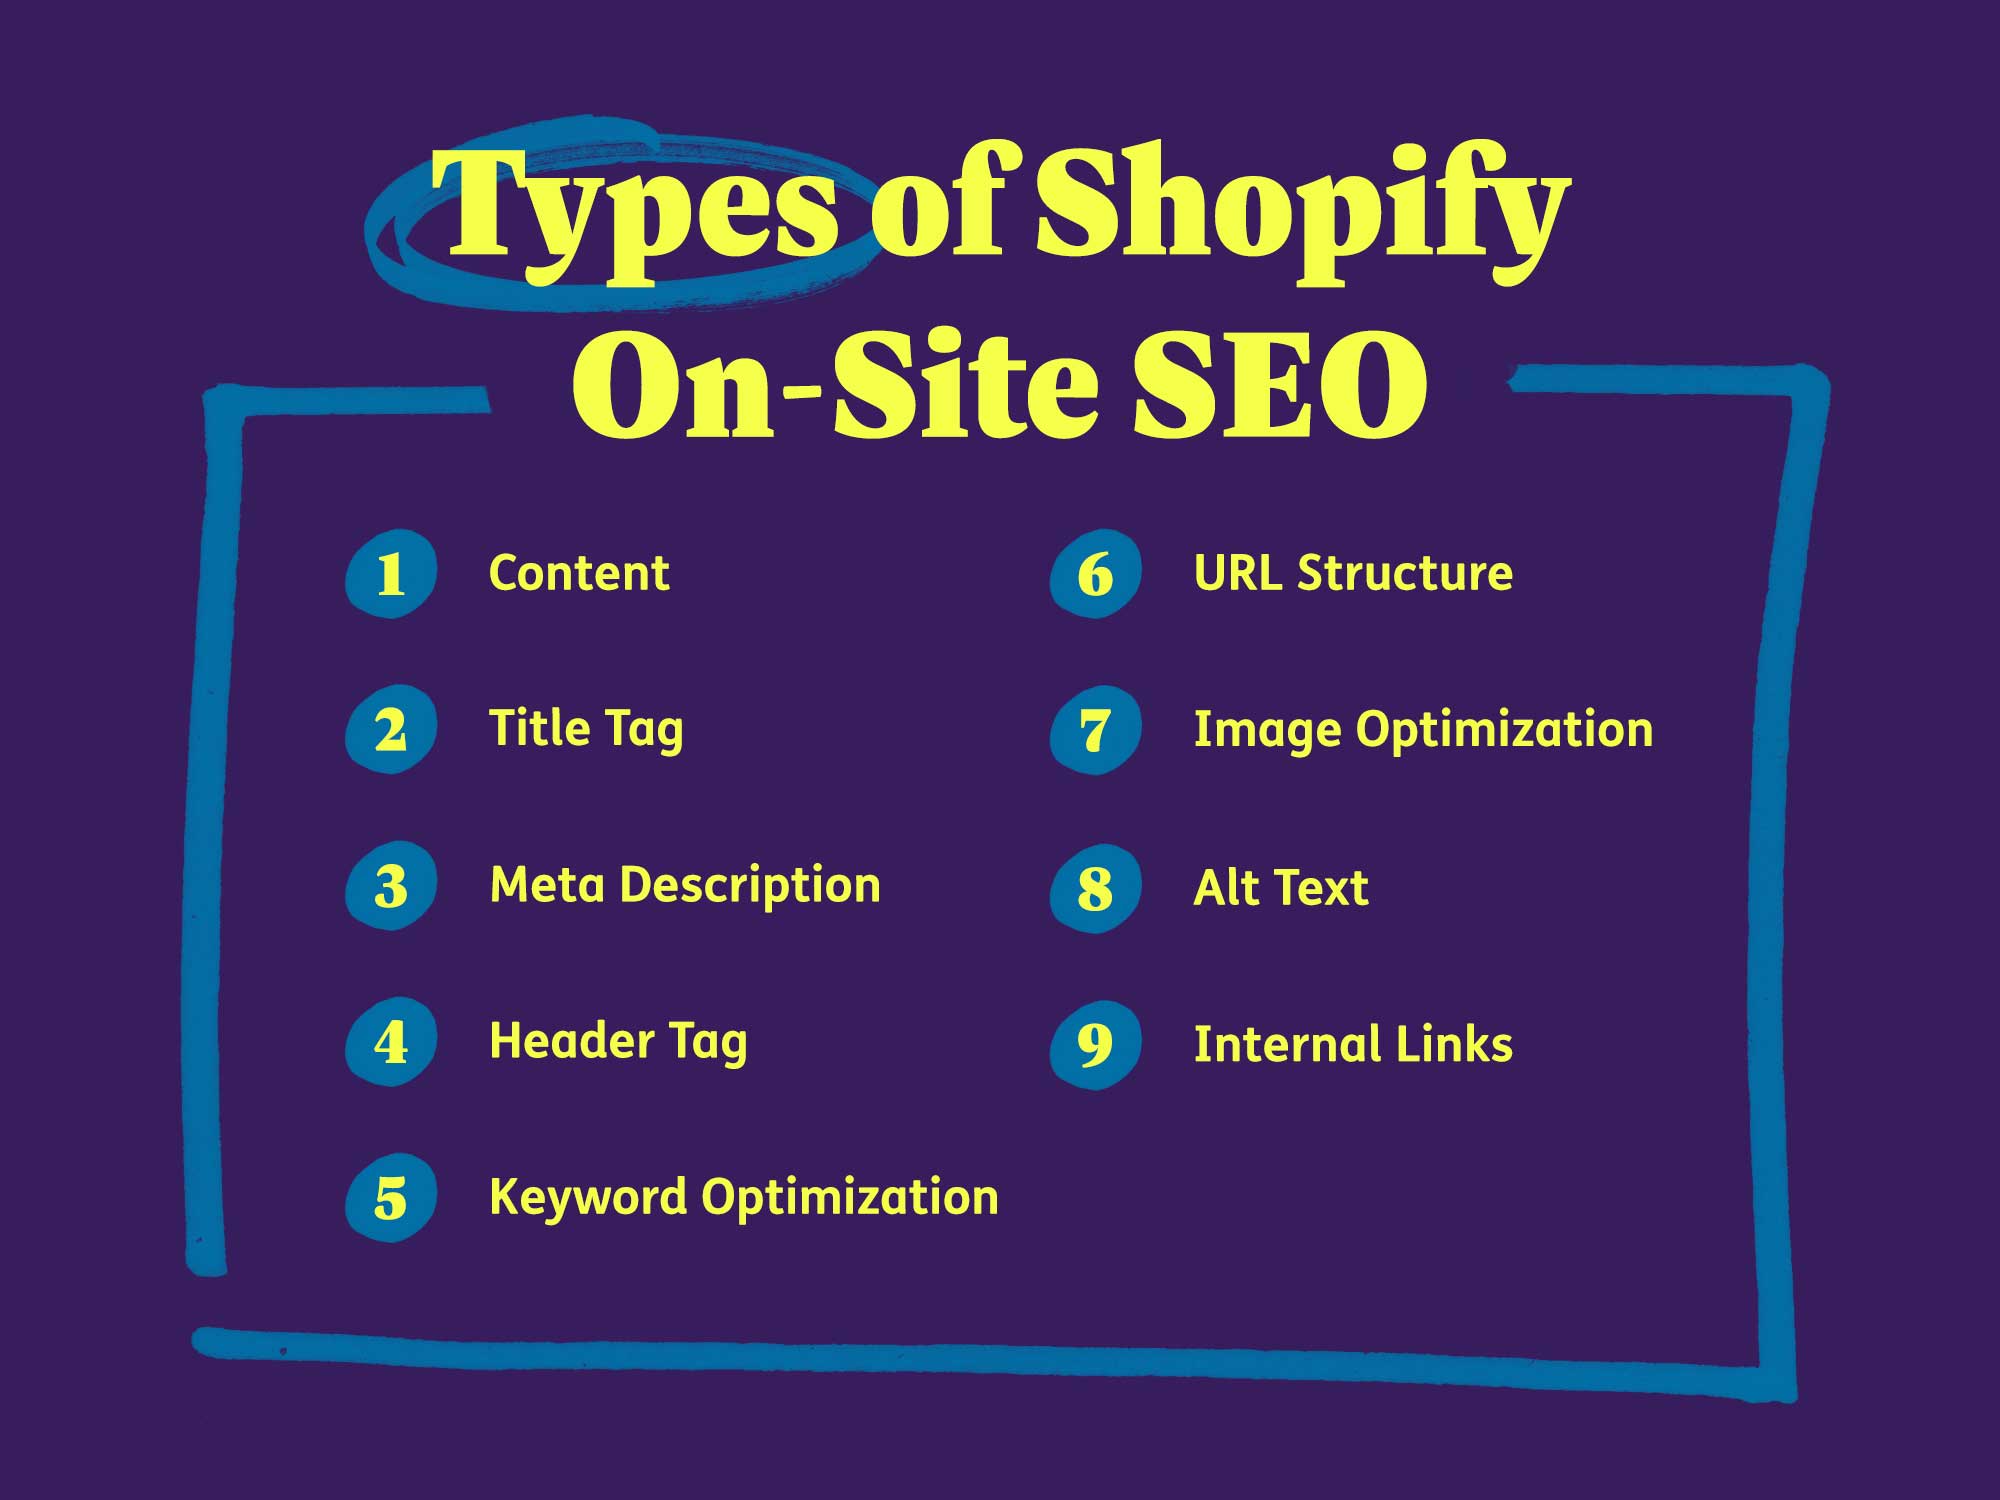 Types of Shopify on-site SEO: content, title tag, meta description, header tag, keyword optimization, URL structure, image optimization, alt text, and internal links